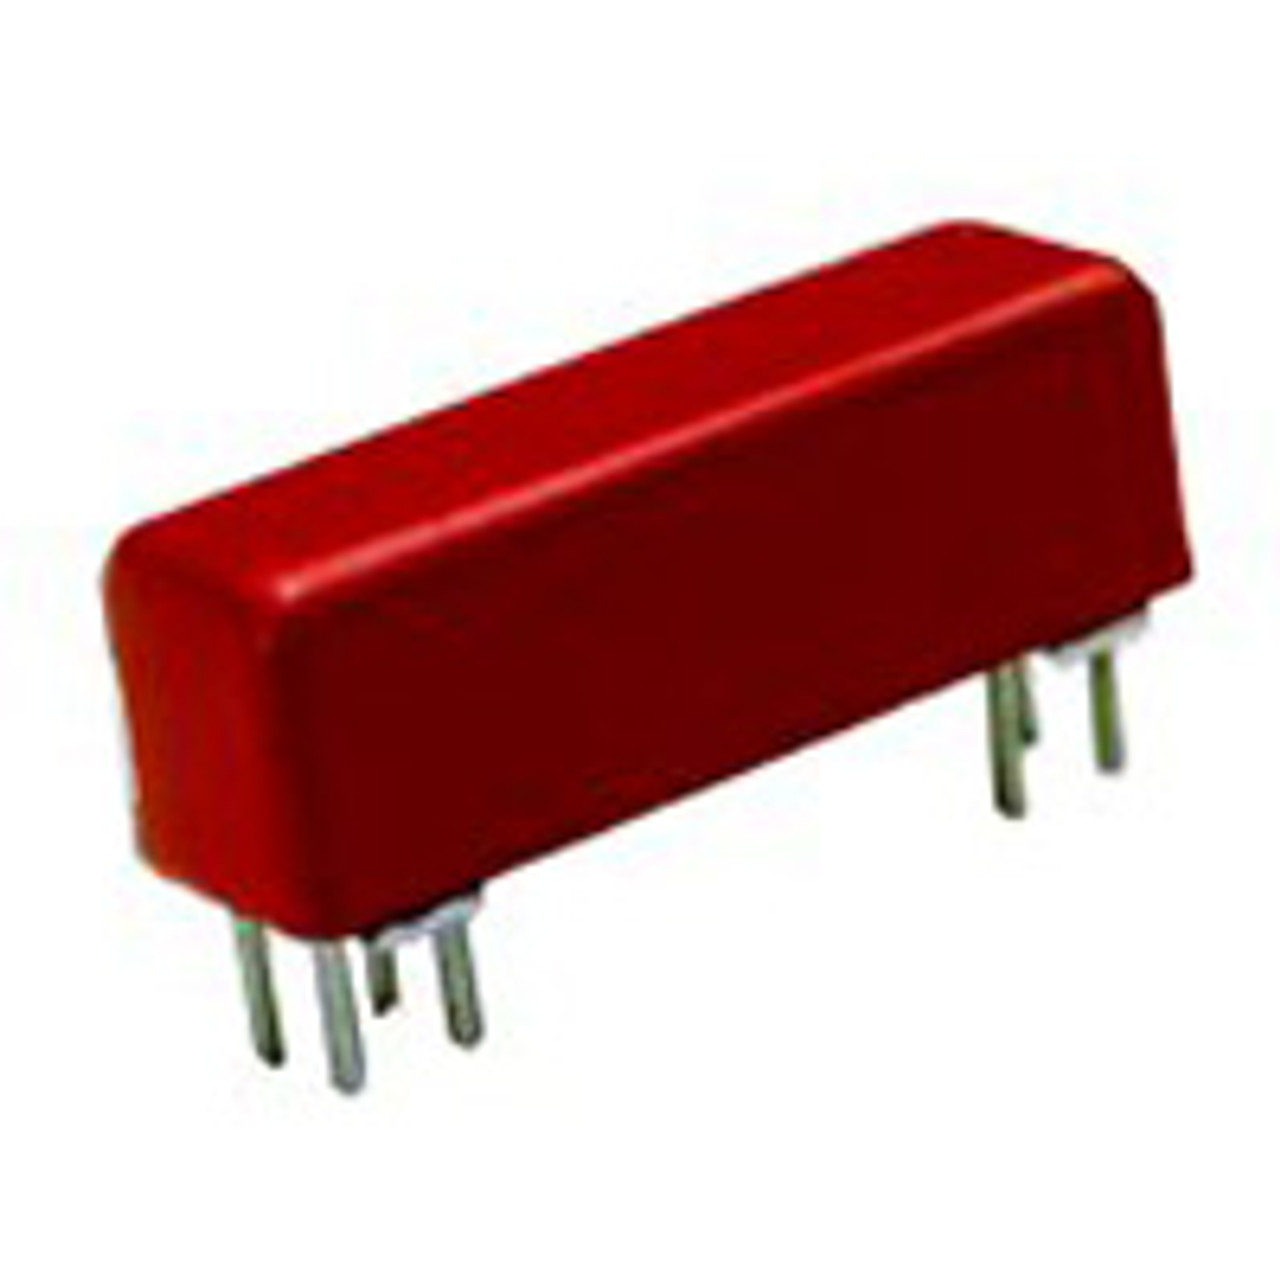 Coto 2900-0038 Reed Relays